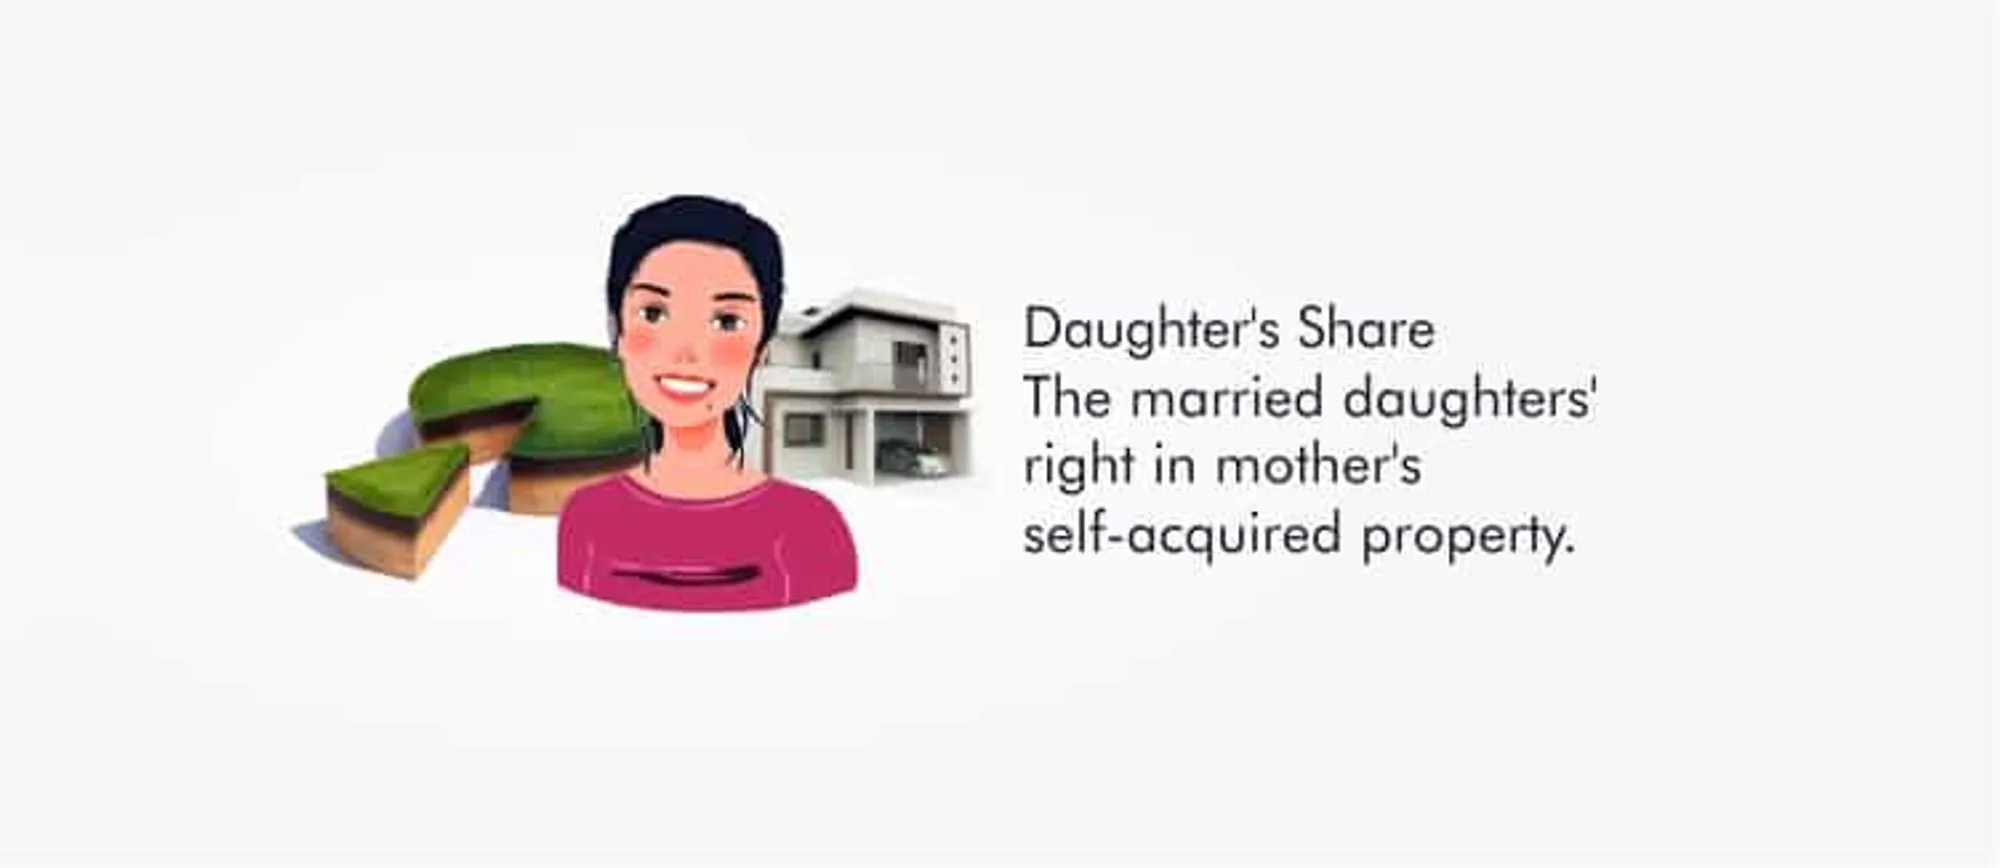 Daughter's Share The married daughters' right in mother's self-acquired property